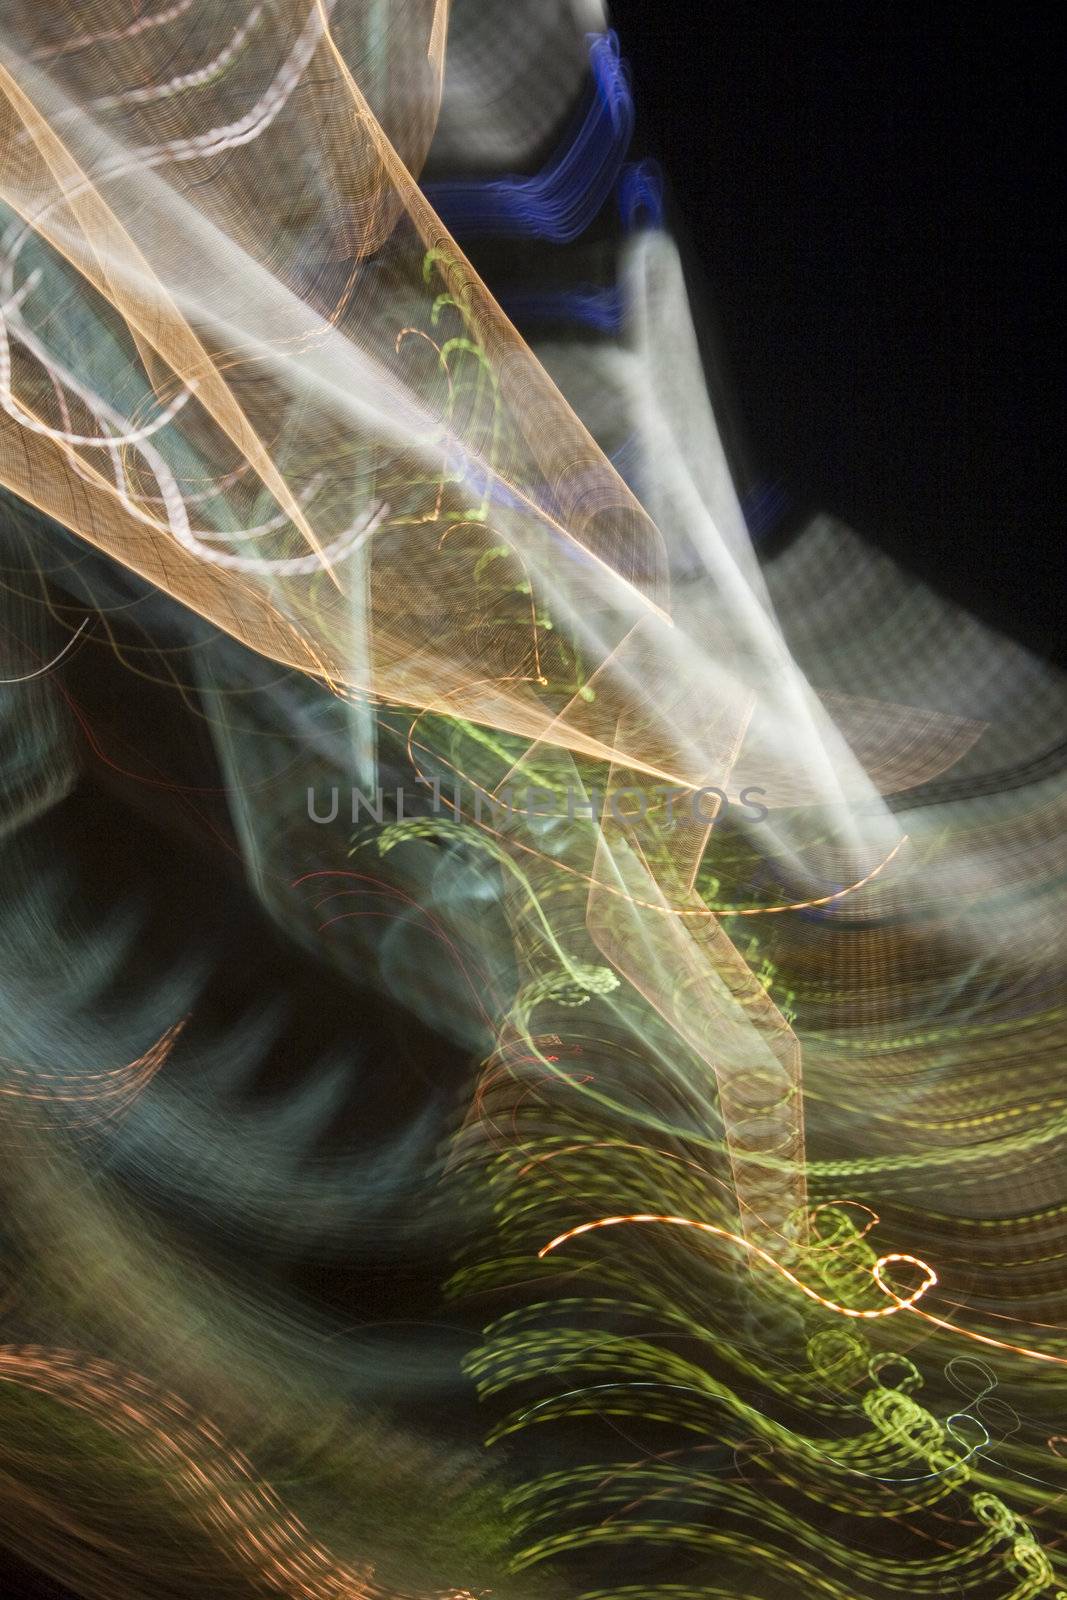 Abstract light trails captured from cars, signs, and other landmarks